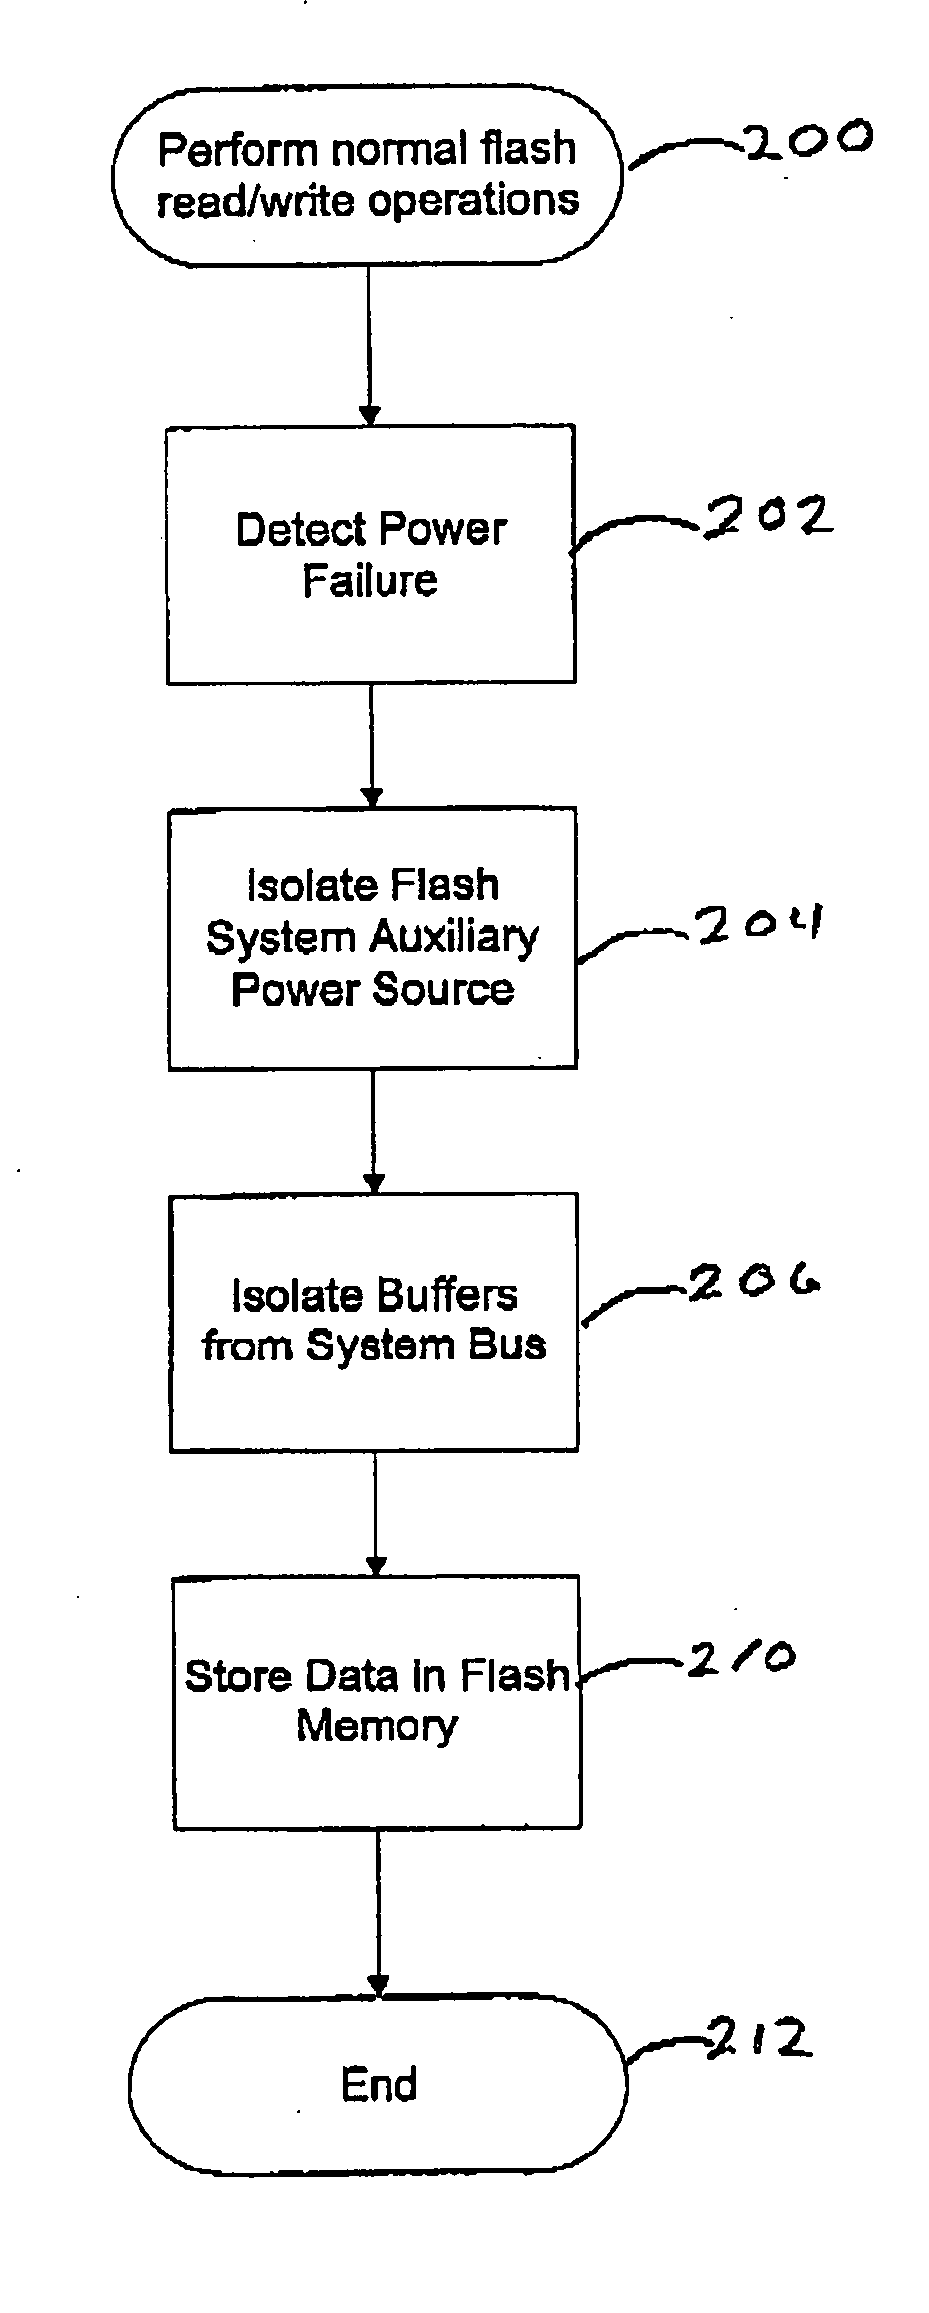 Protection against data corruption due to power failure in solid-state memory device